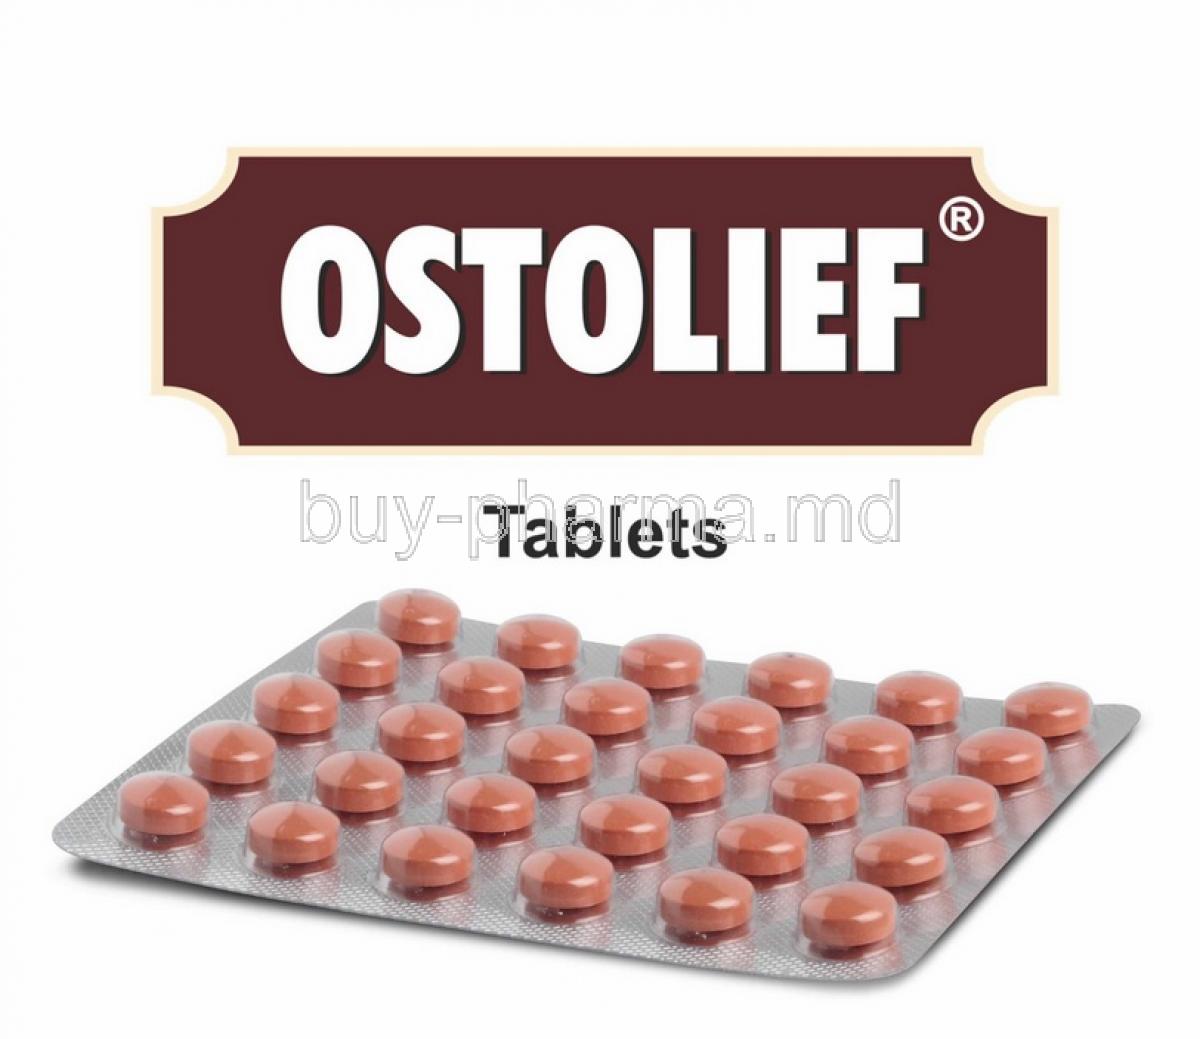 Ostolief box and tablets